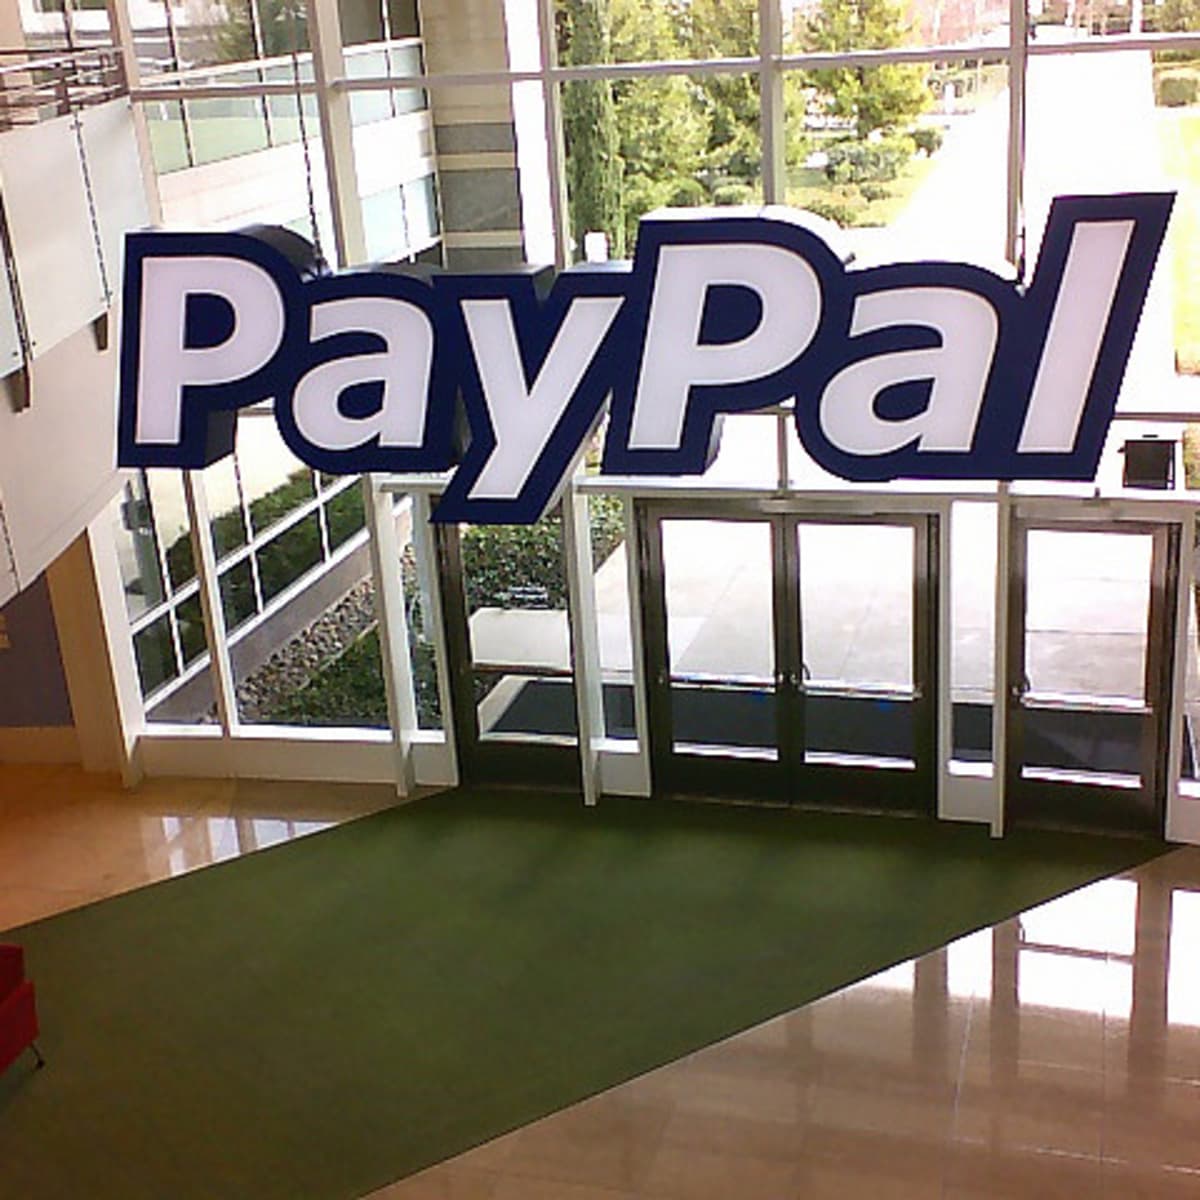 Explained: The PayPal Dispute Process - ToughNickel